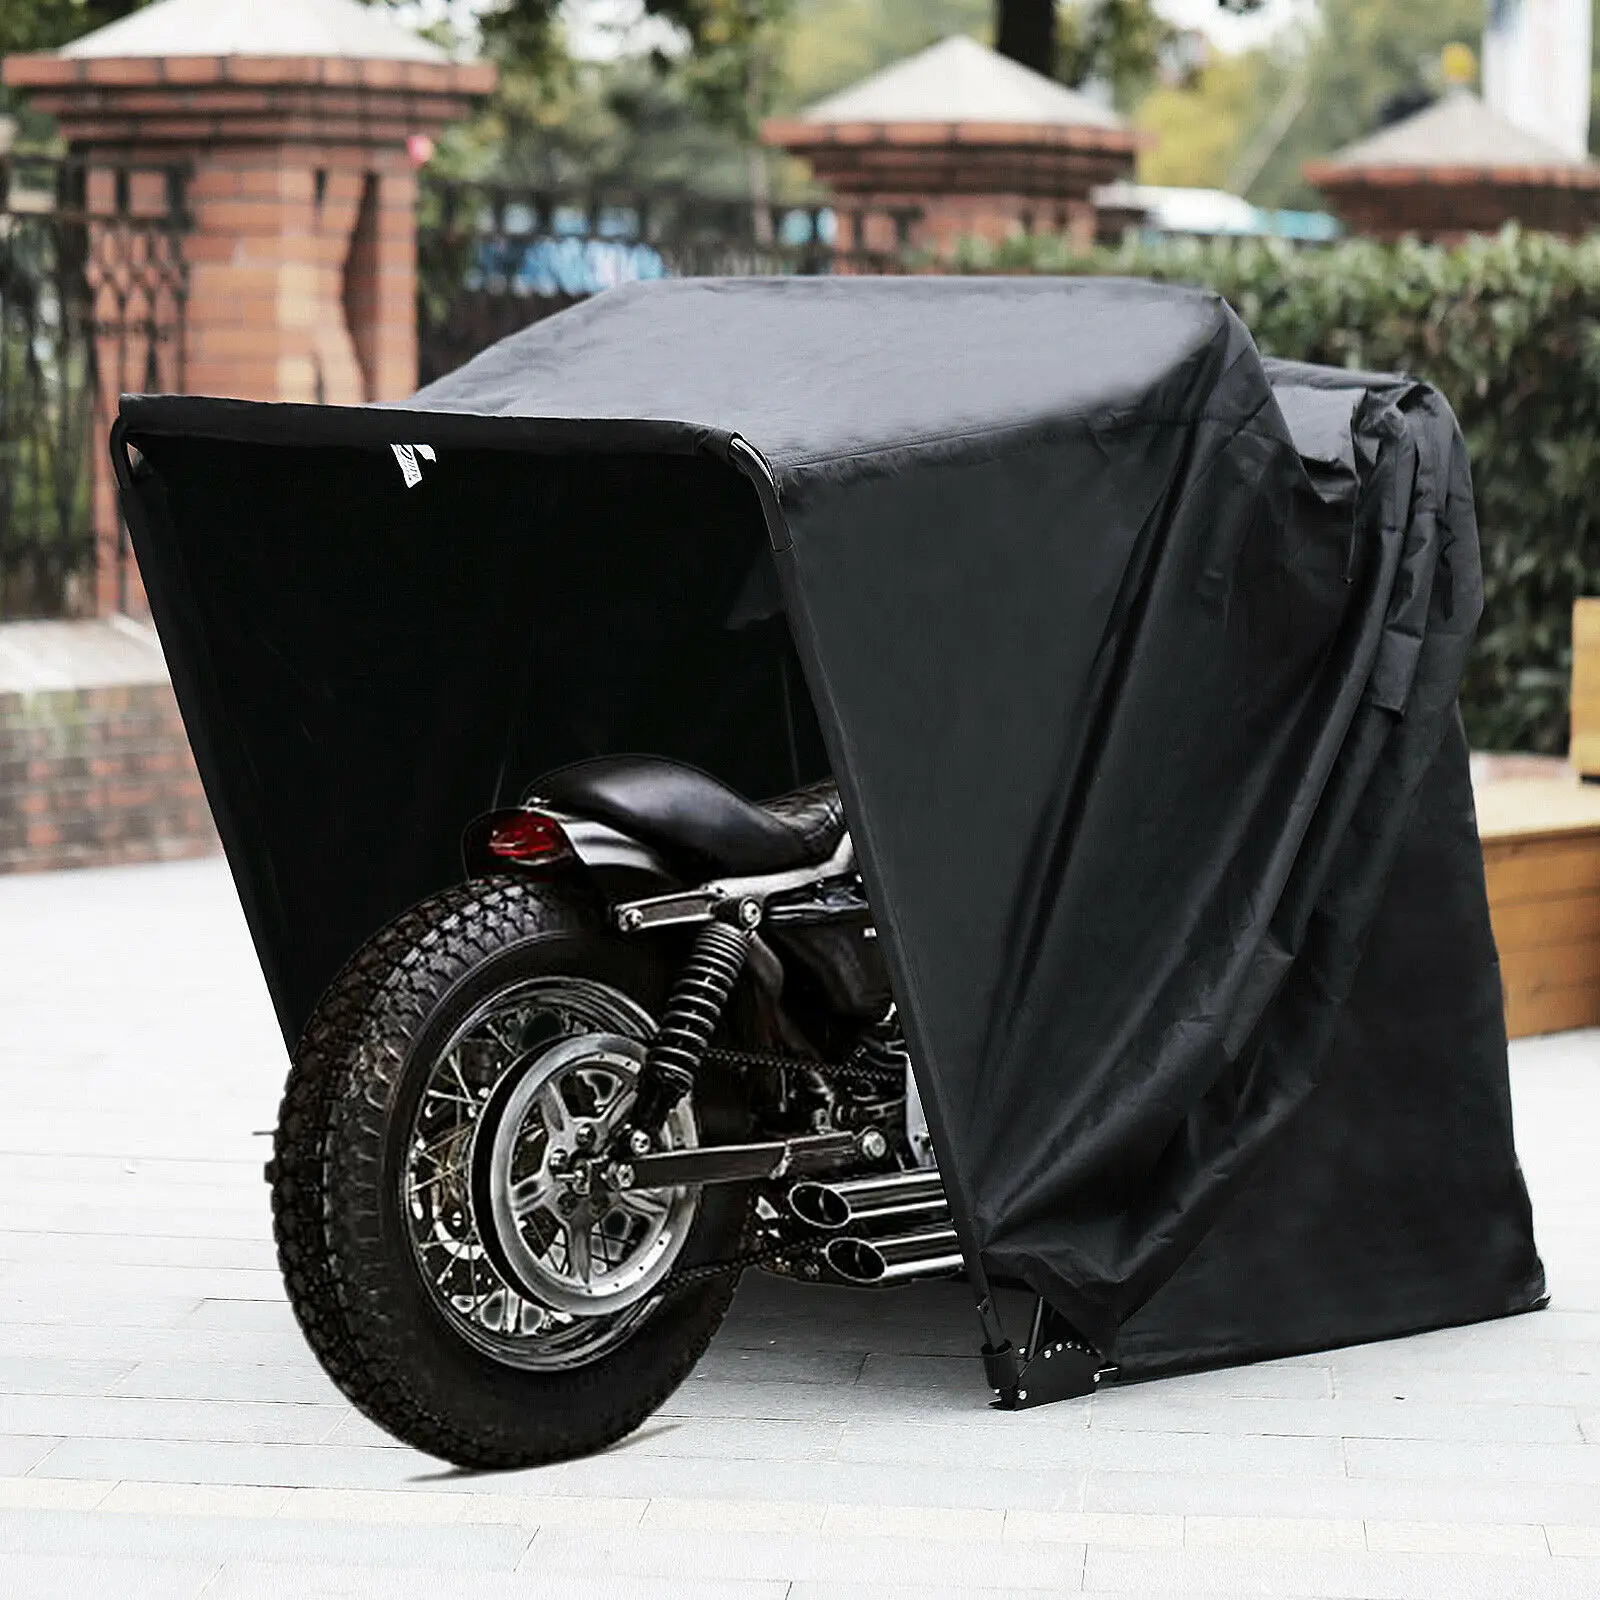 Scooter Cover Vespa Cover Motorbike Storage Heavy Duty Motorbike Cover Waterproof Motorcycle Cover with perfect fit Velmia Motorbike Cover Outdoor & Indoor - 265 x 105 x 130 cm 